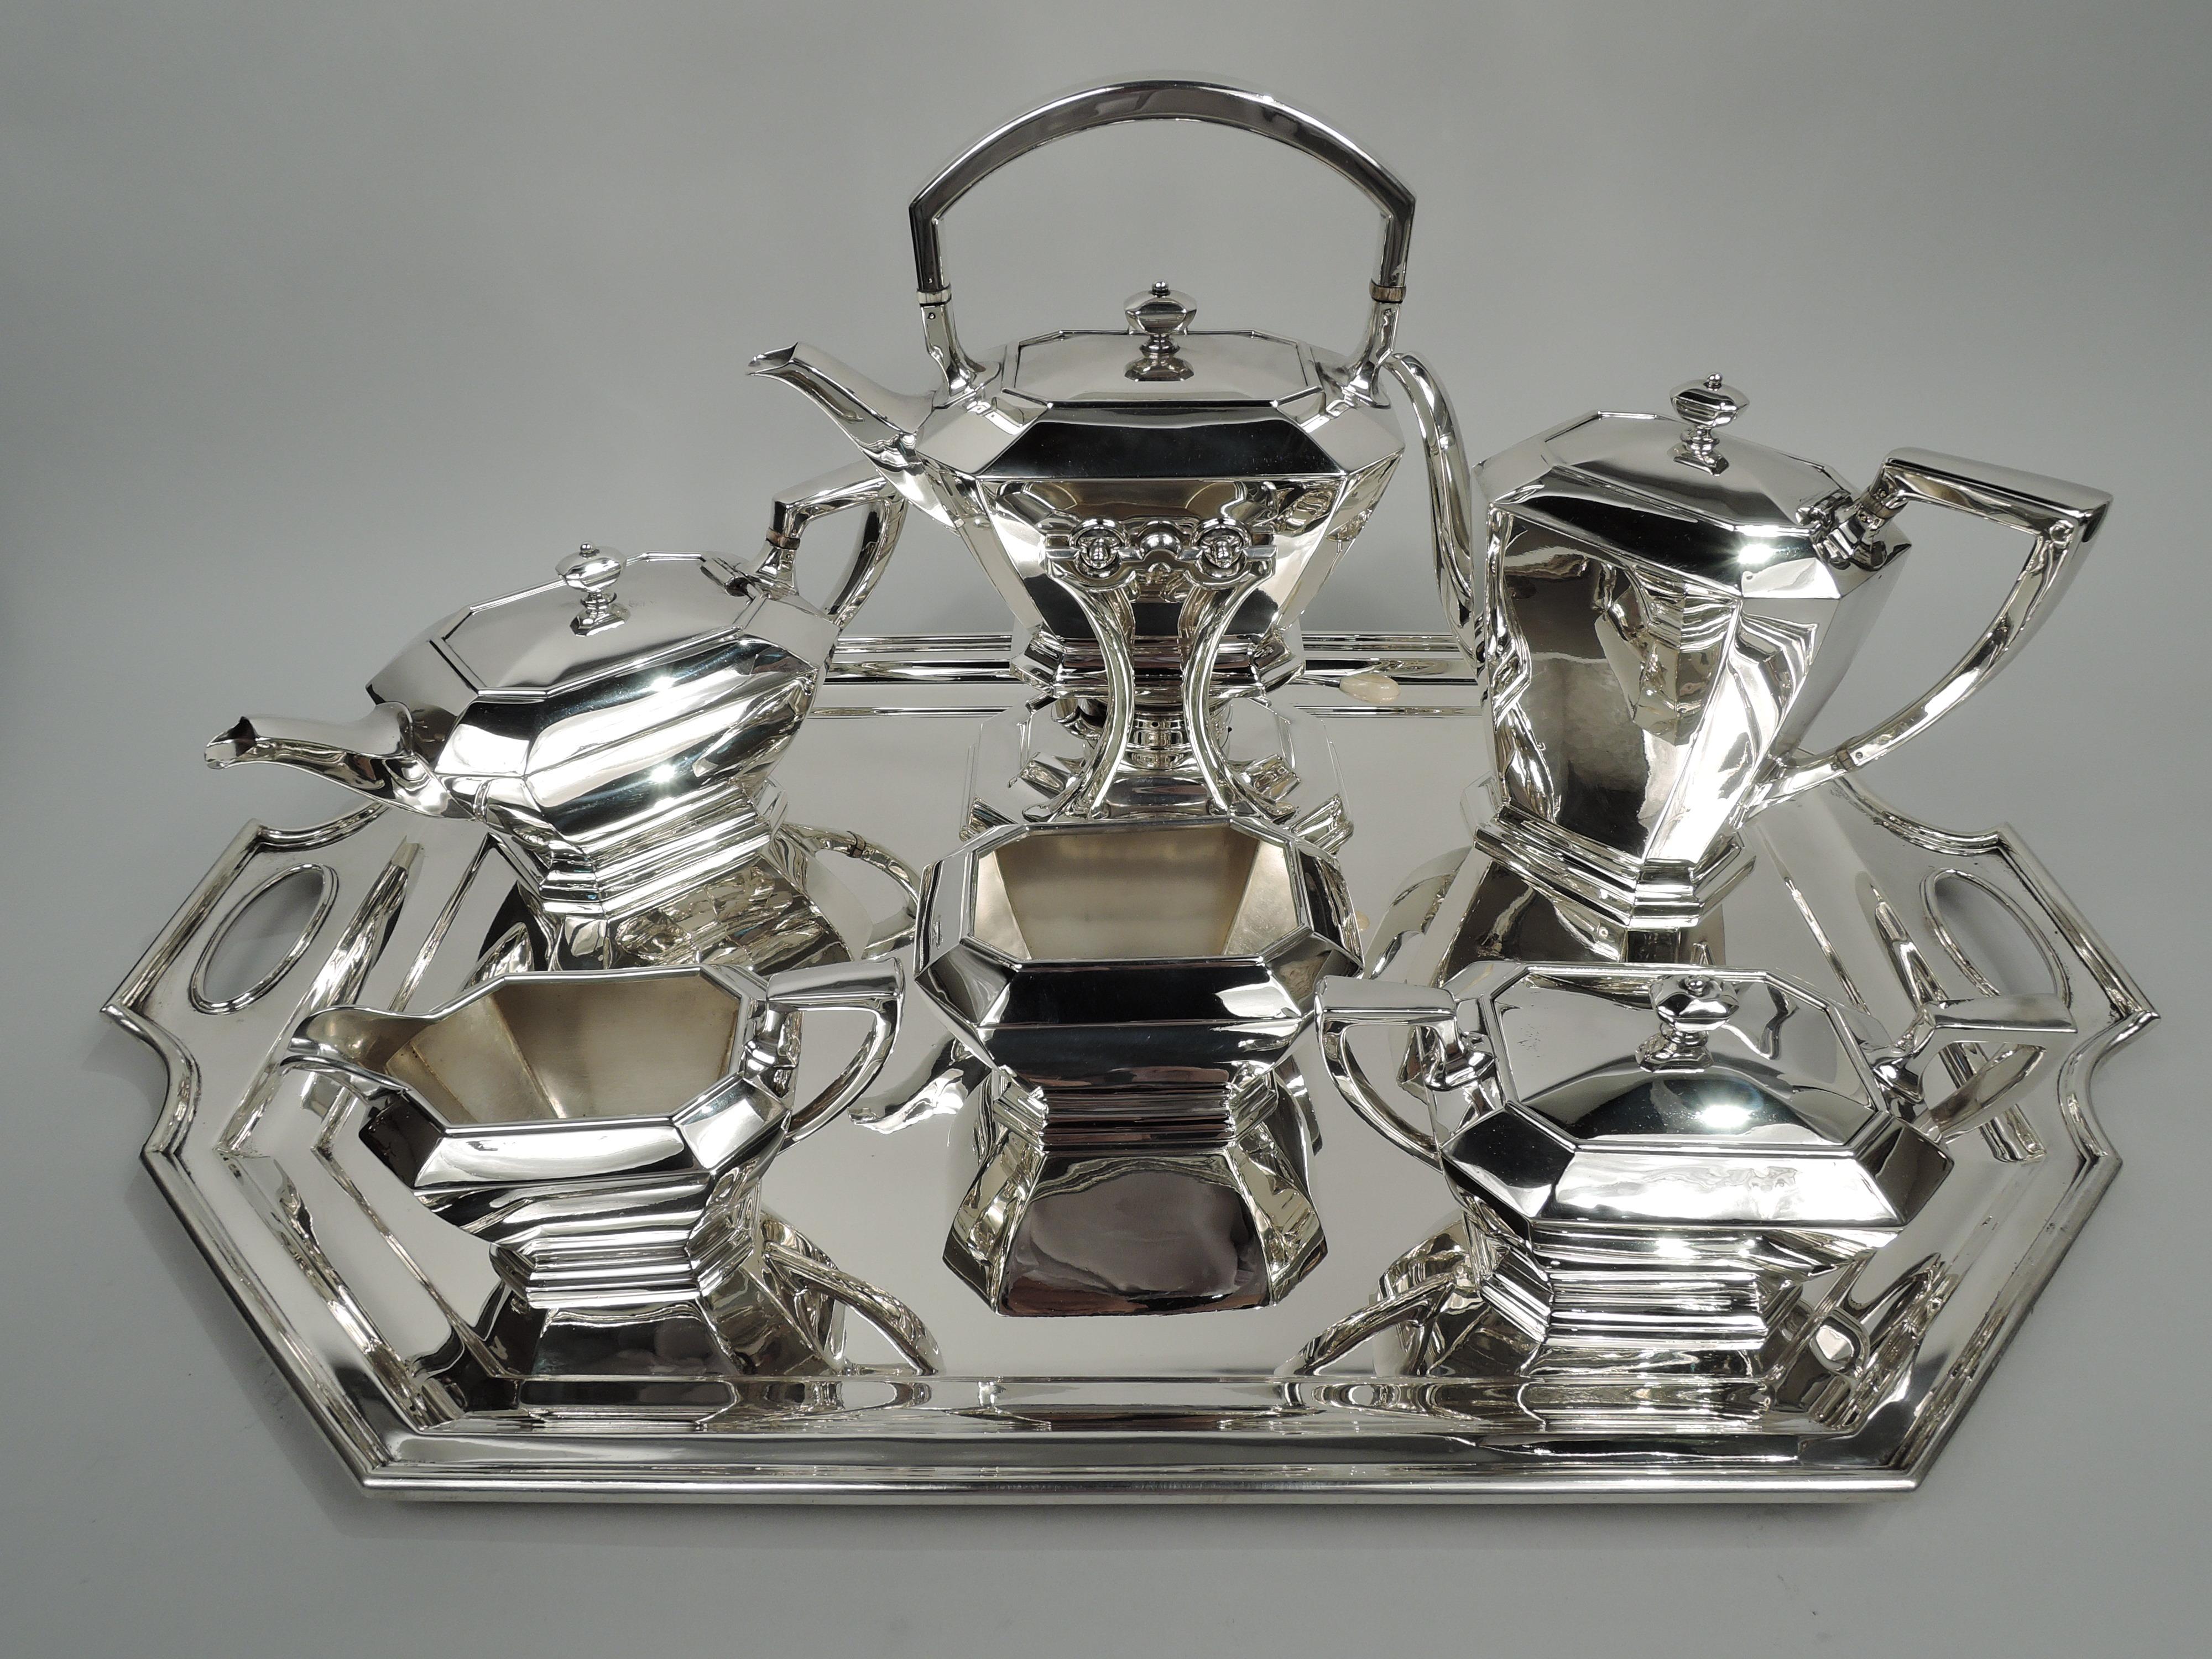 Fairfax sterling silver coffee and tea set on tray. Made by Durham, which was part of Gorham, in Concord, ca 1926. This set comprises 7 pieces: Hot water kettle on stand, coffeepot, teapot, creamer, sugar, and waste bowl on tray.

Each: Chamfered.